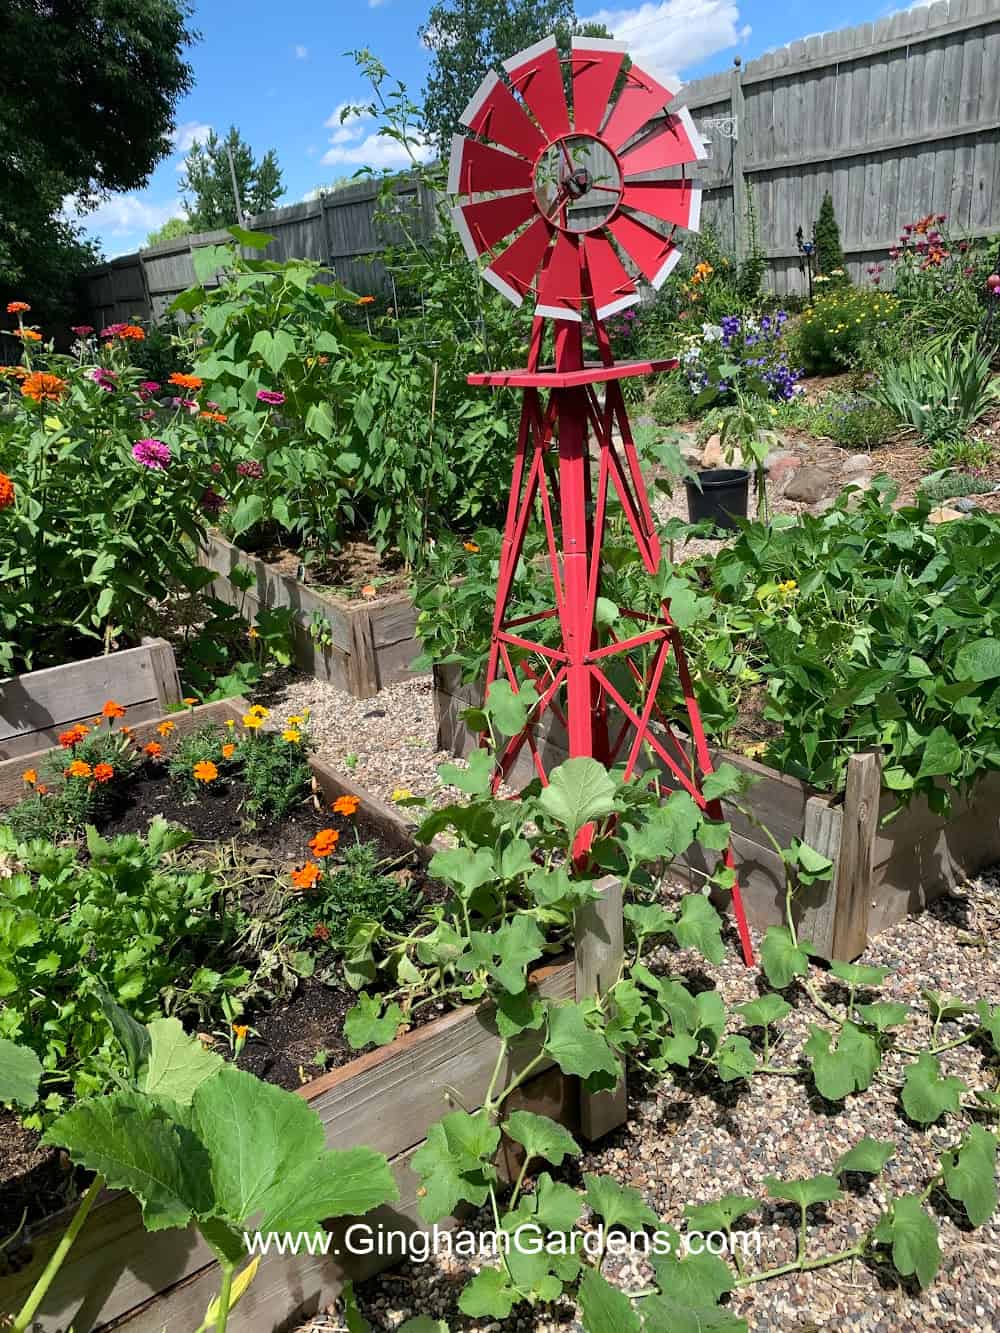 Red wind mill as a focal point in a garden.